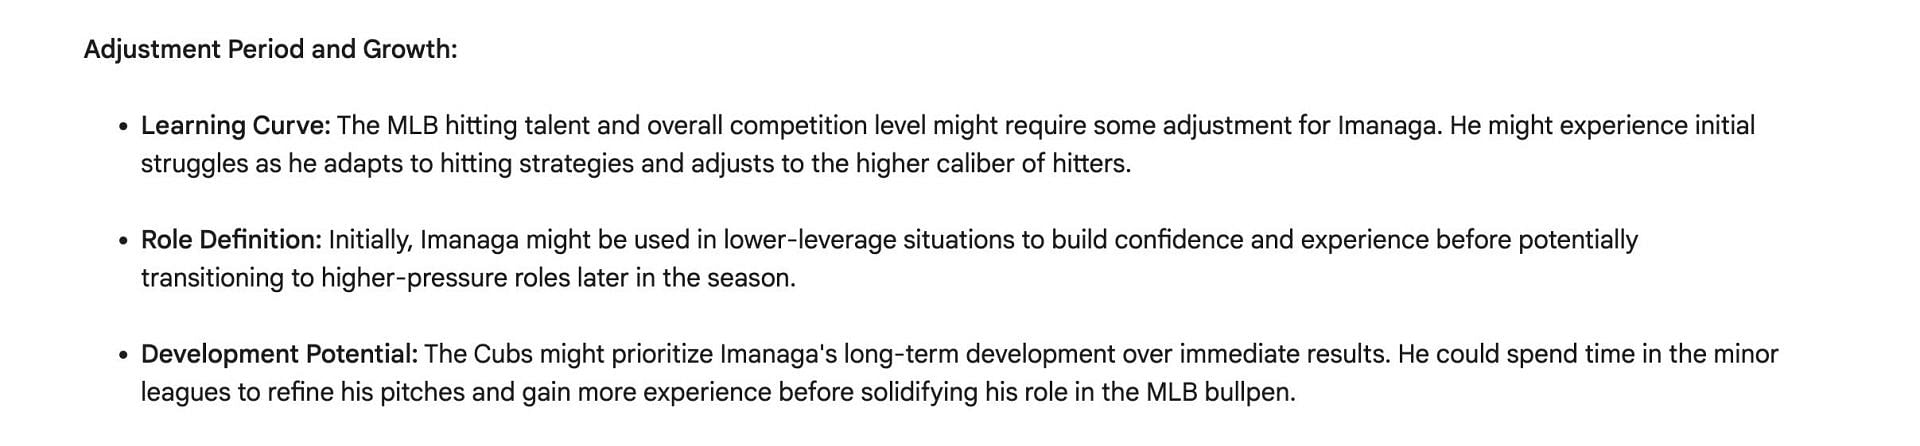 According to AI, Shota Imanaga might face a period of adjustment as he learns MLB hitting and the competitive level.